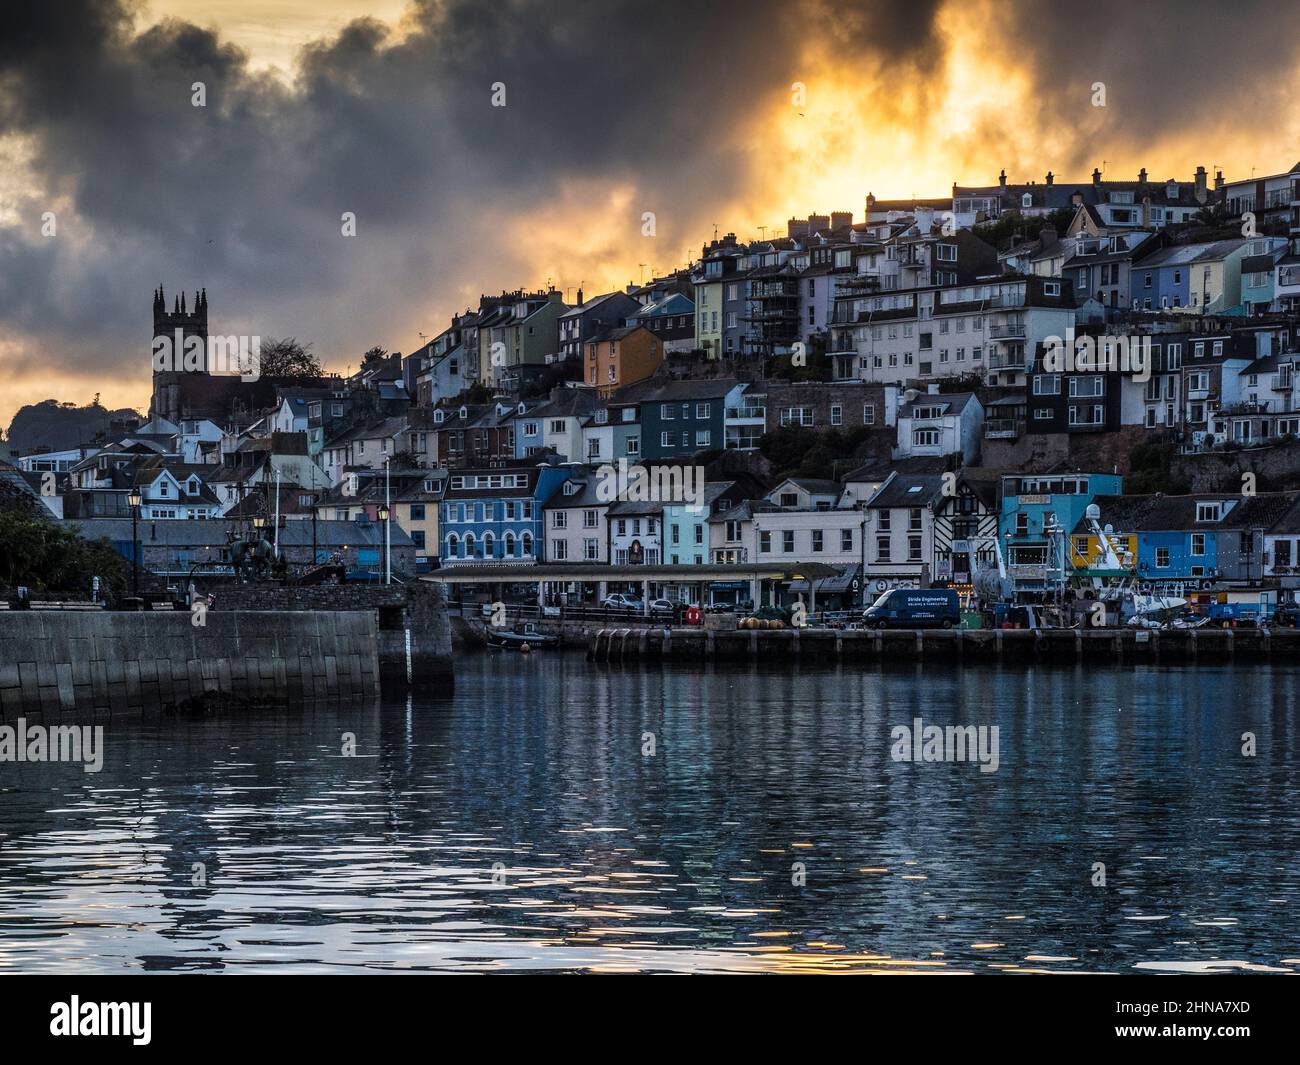 A dramatic stormy sunset over All Saints' Church in Brixham, Devon. Stock Photo